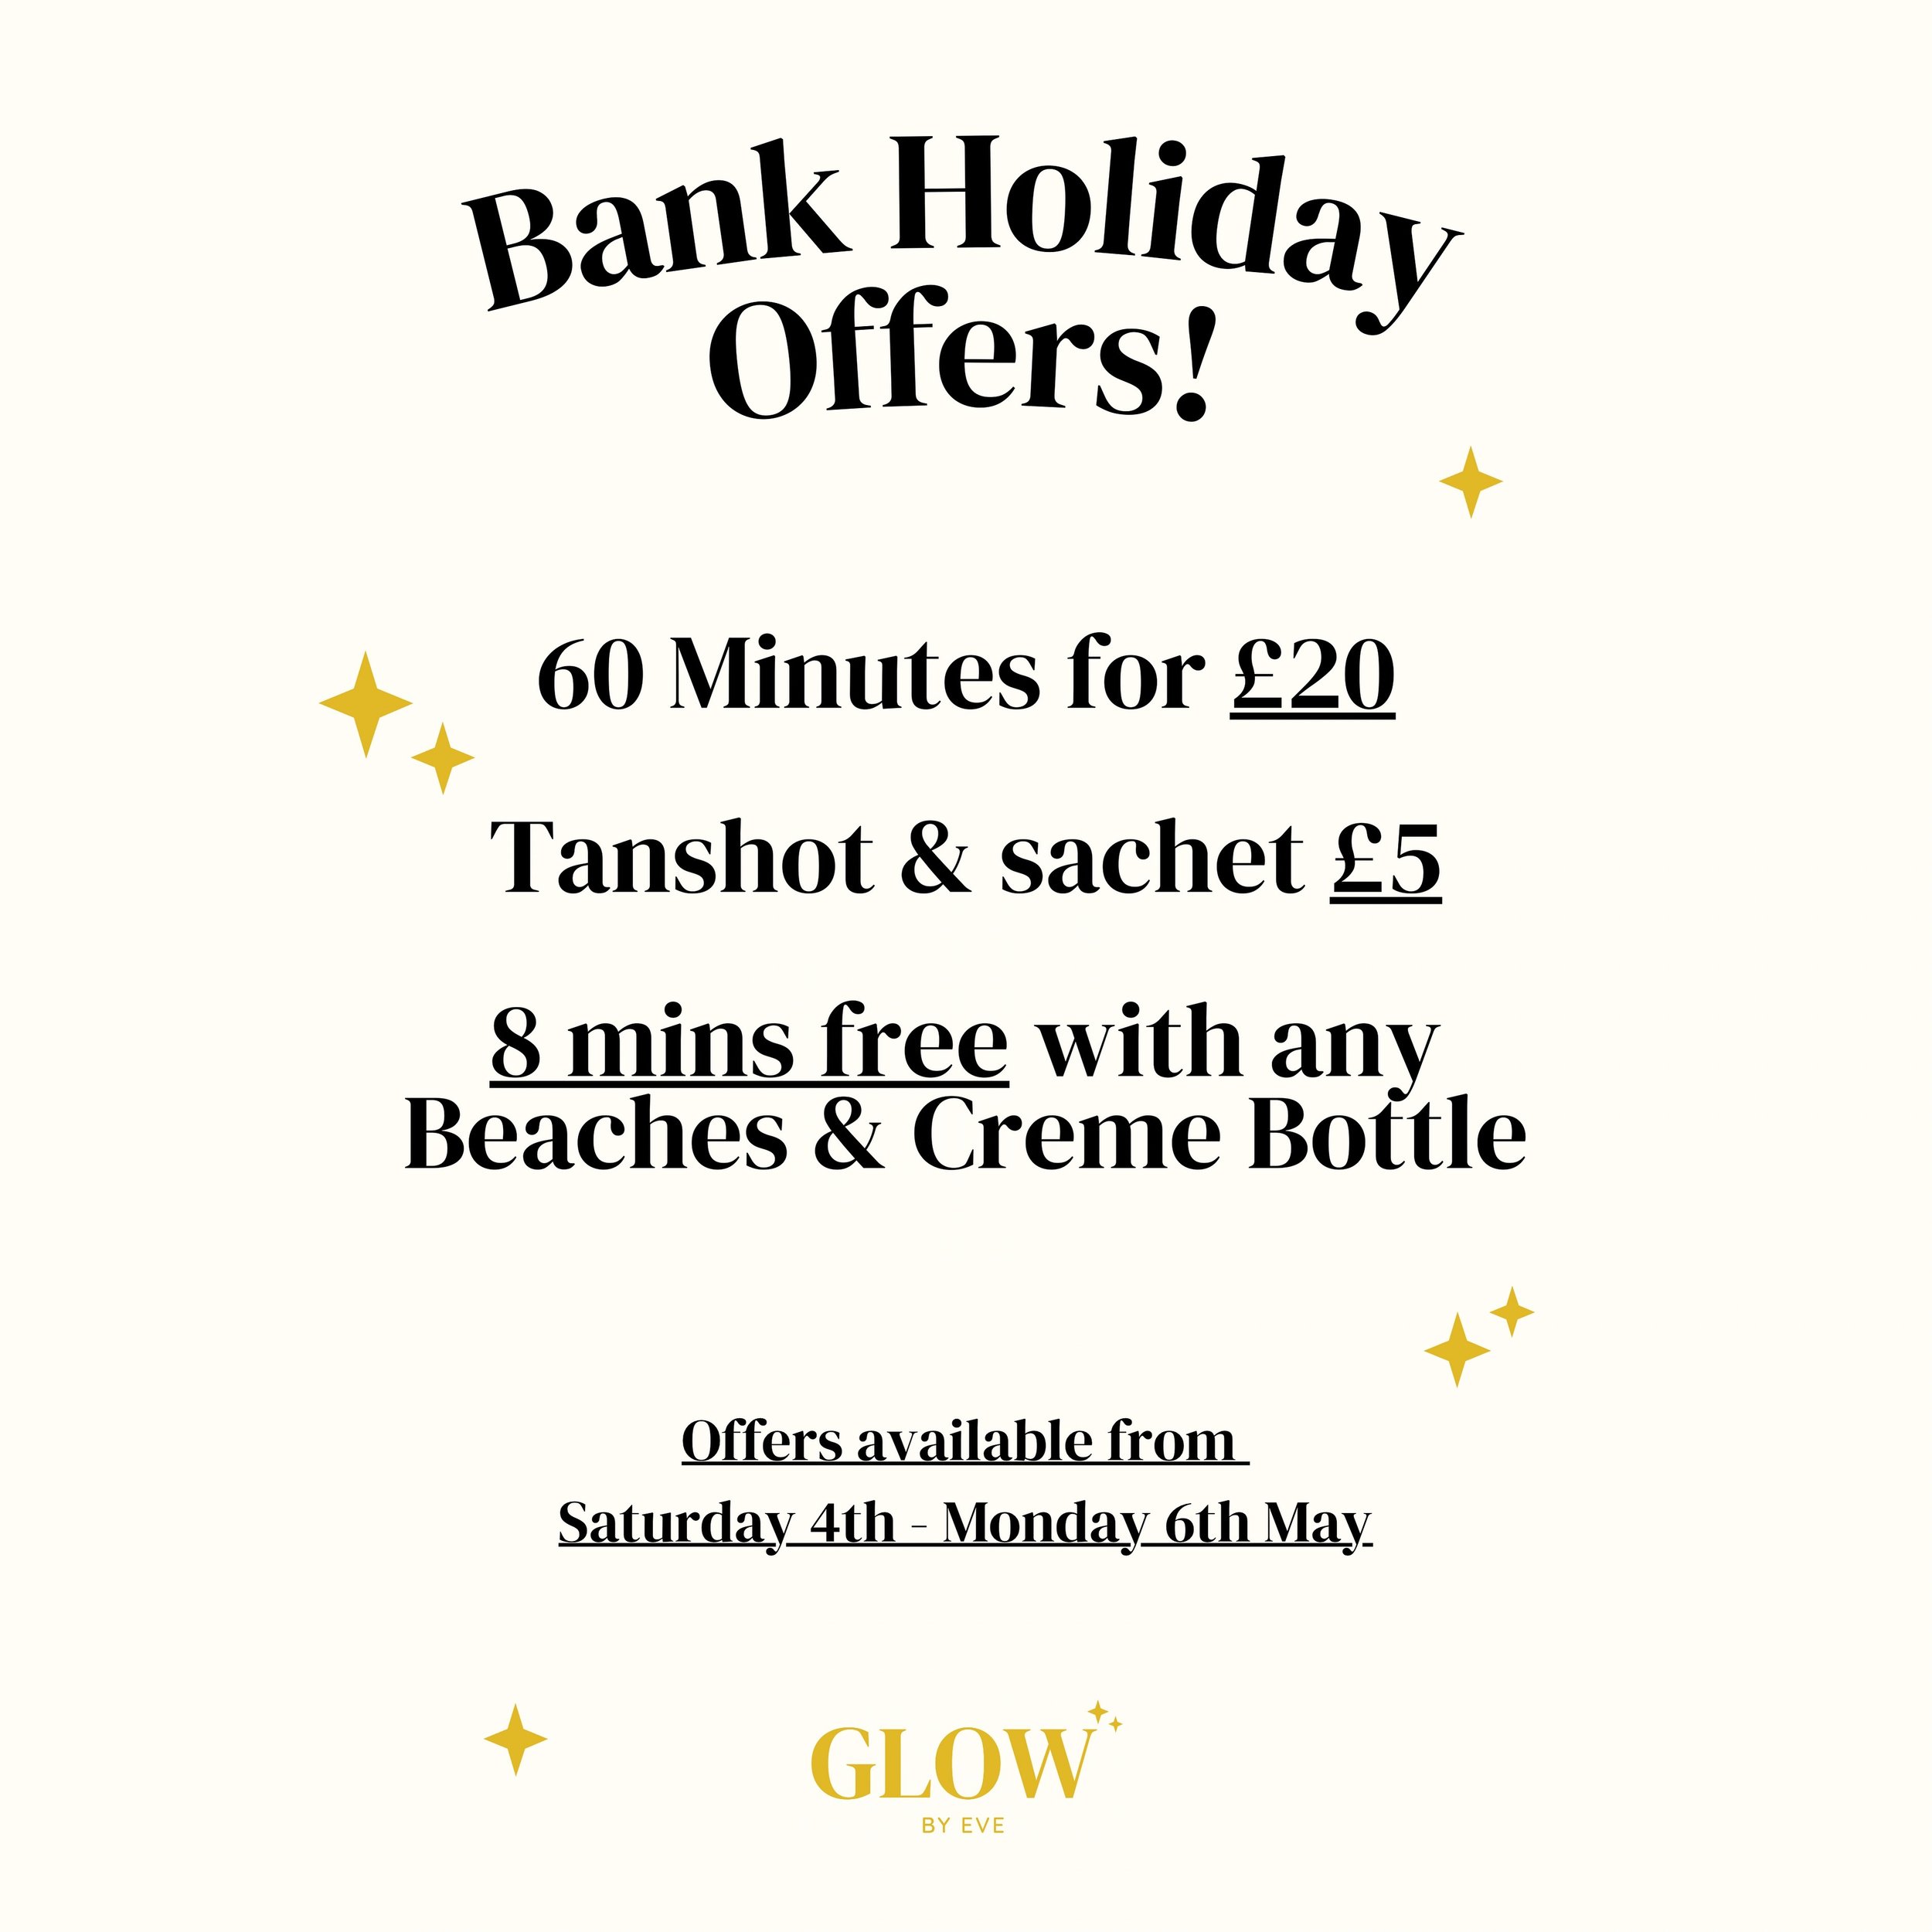 Bank Holiday offers!✨
Available from Saturday 4th to Monday 6th May✨